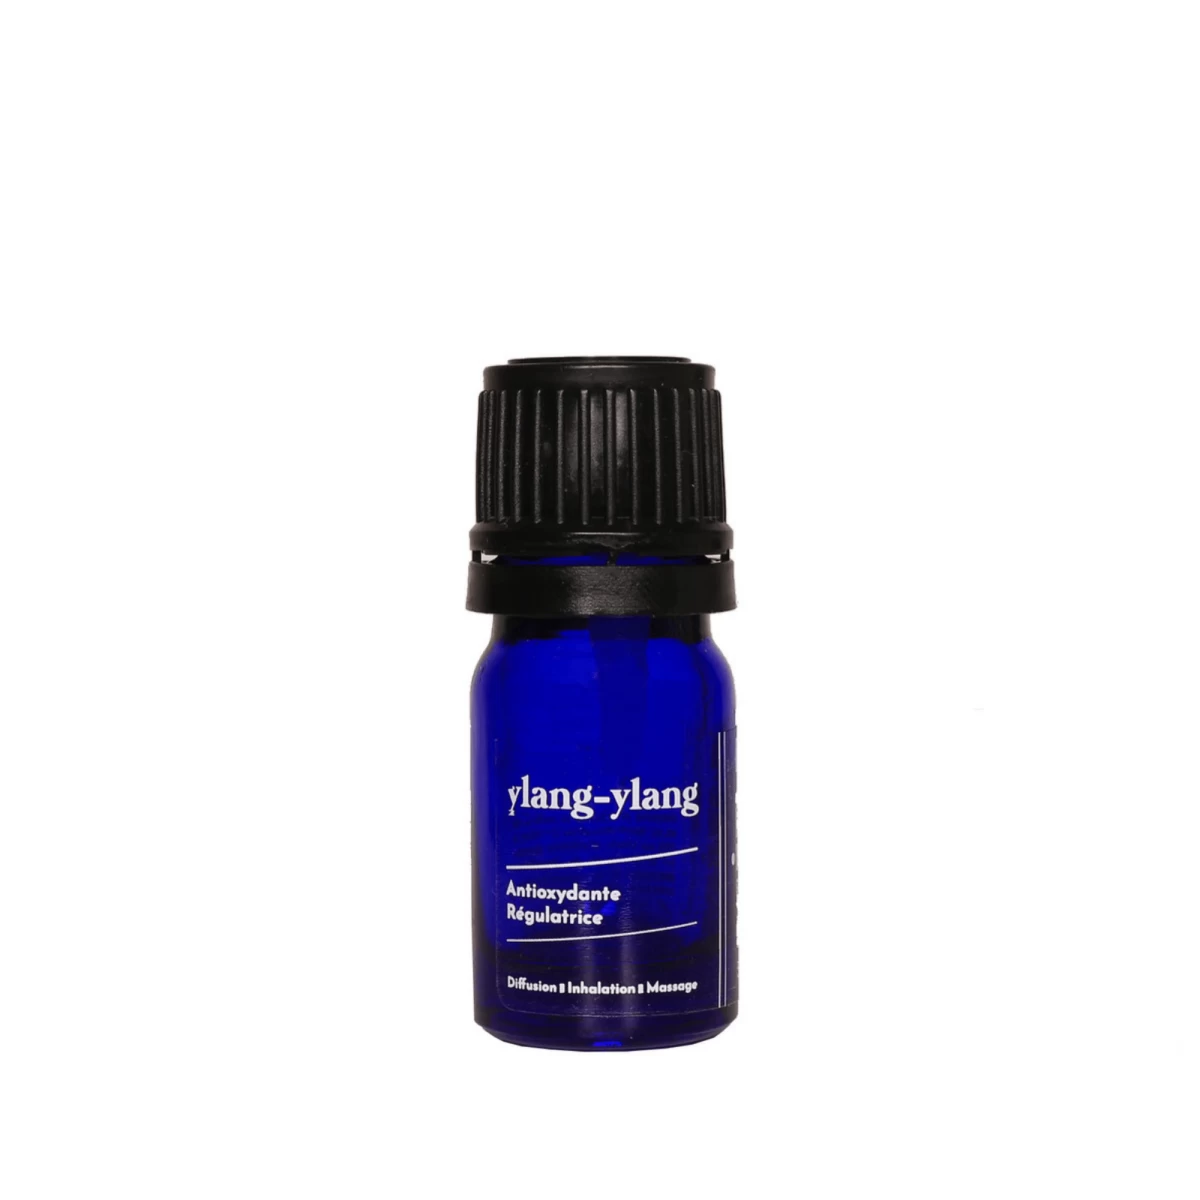 HUILE ESSENTIELLE D'YLANG YLANG COMPLÈTE 5ML